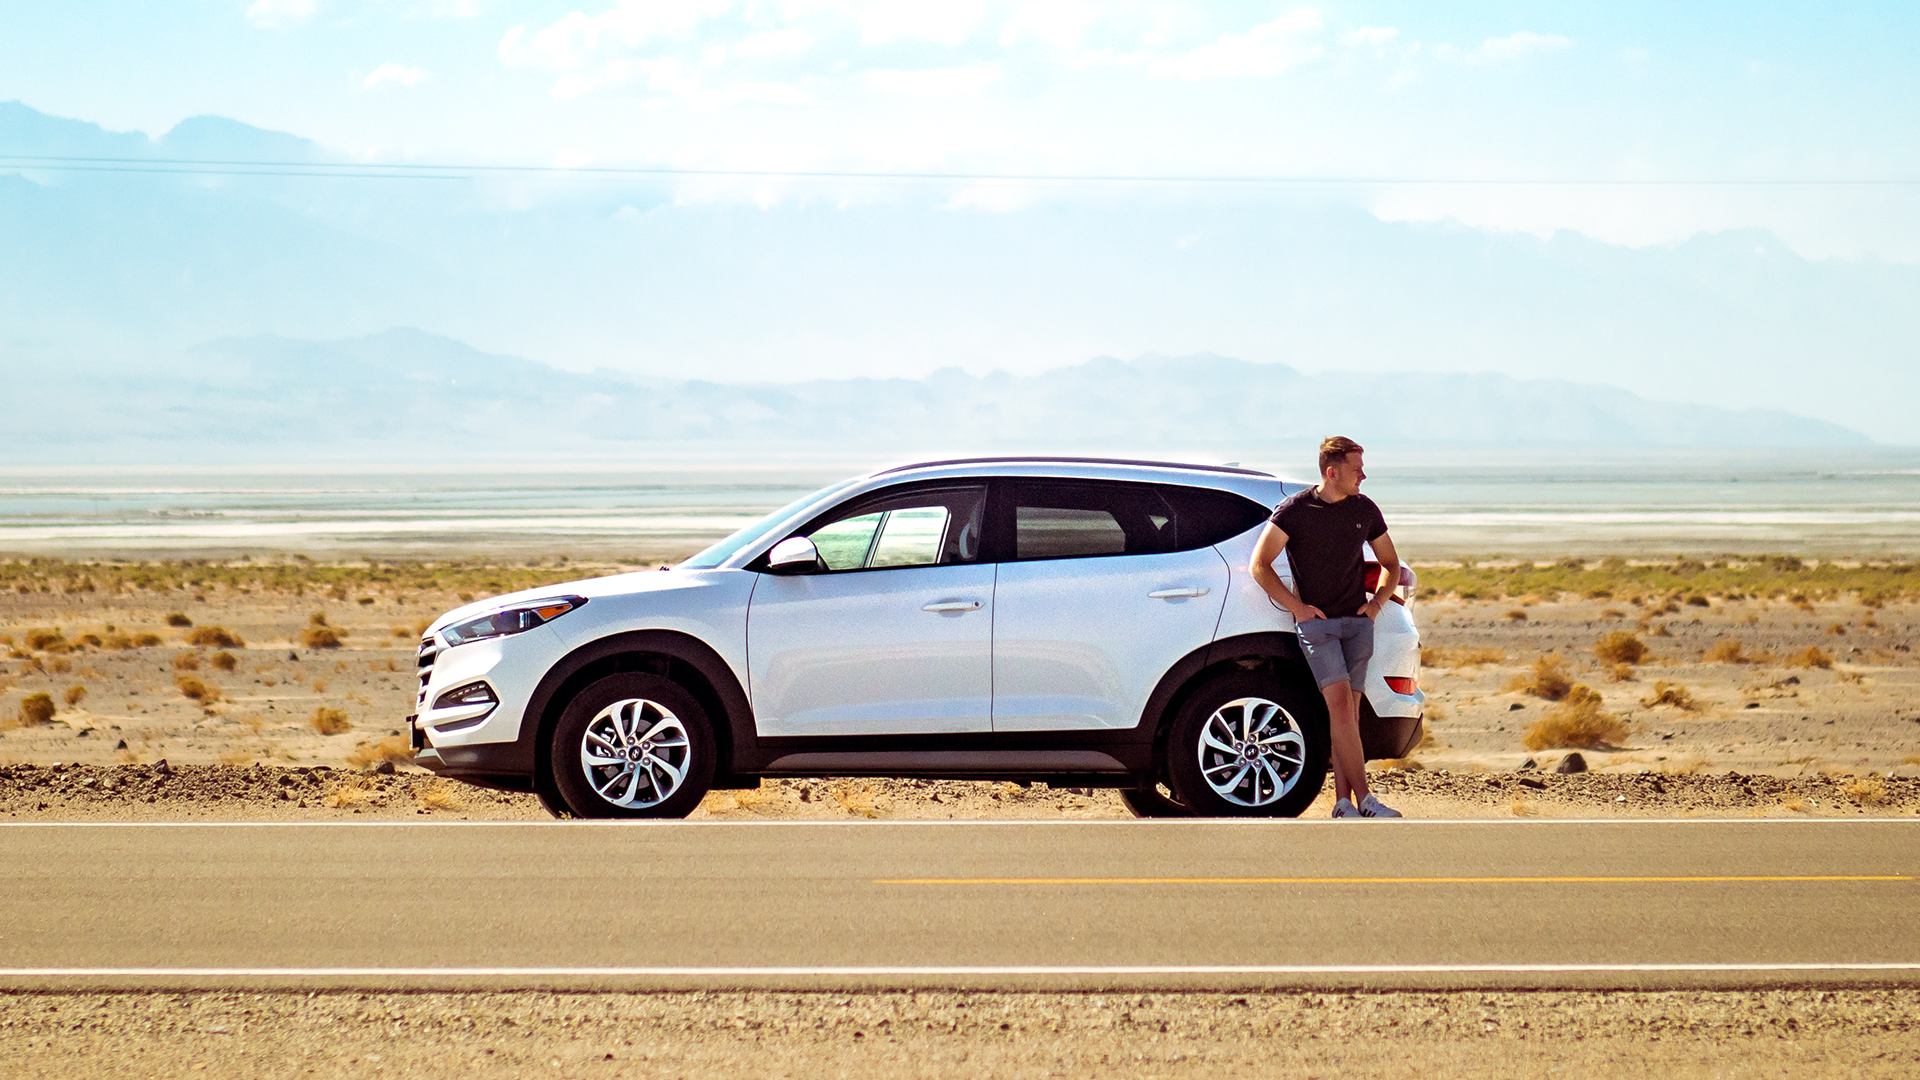 Image of a man standing by a car in the desert